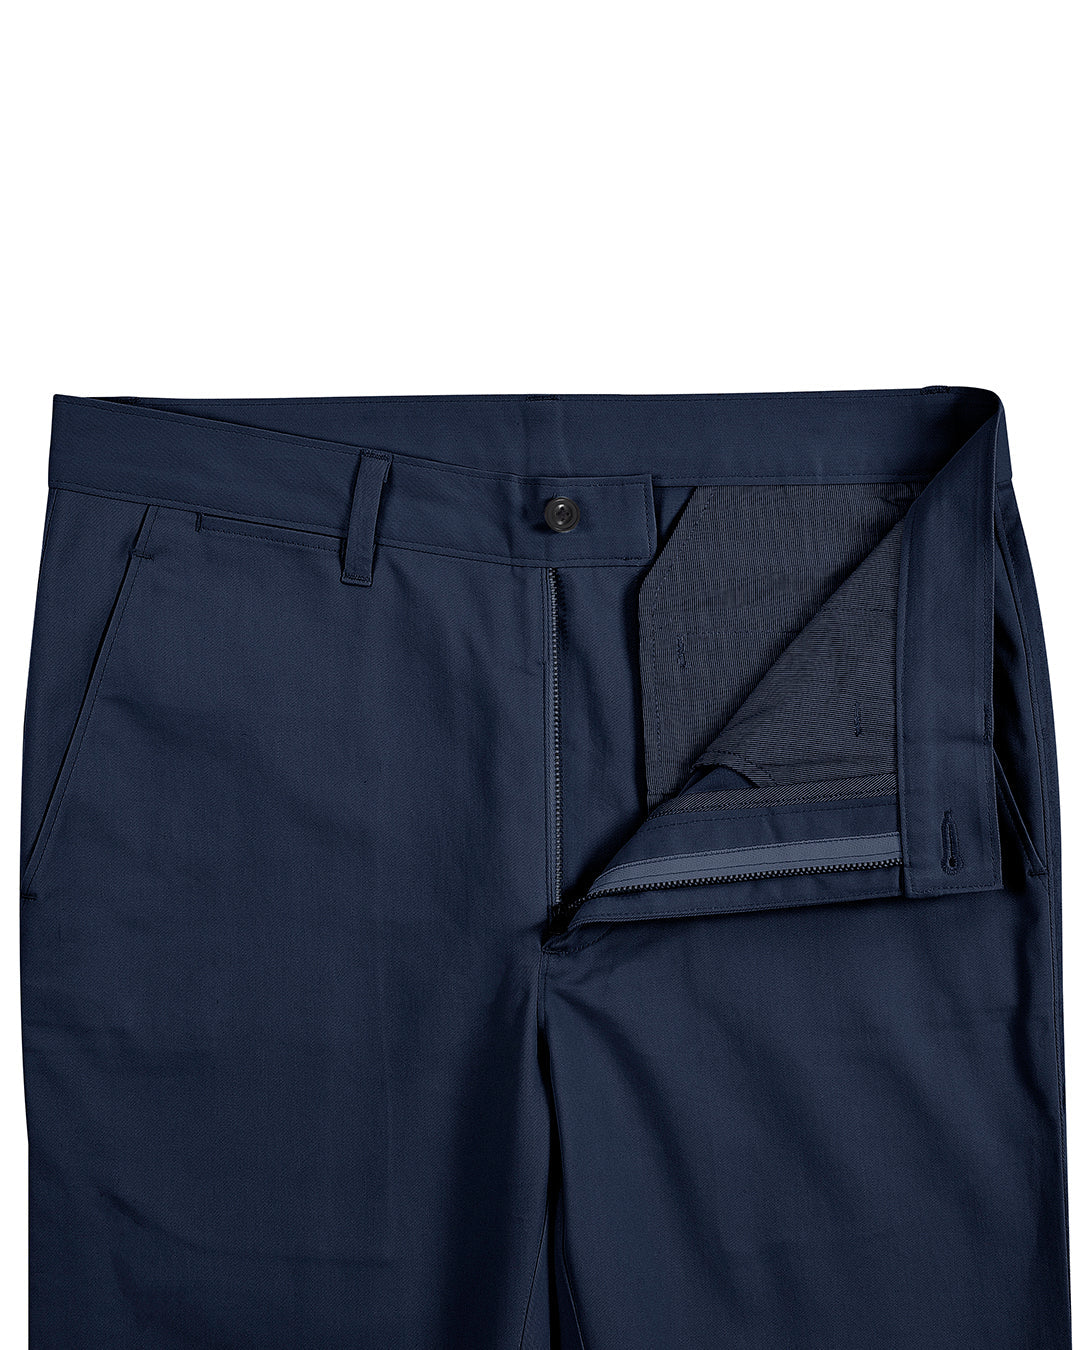 Open front view of custom Genoa Chino pants for men by Luxire in midnight blue